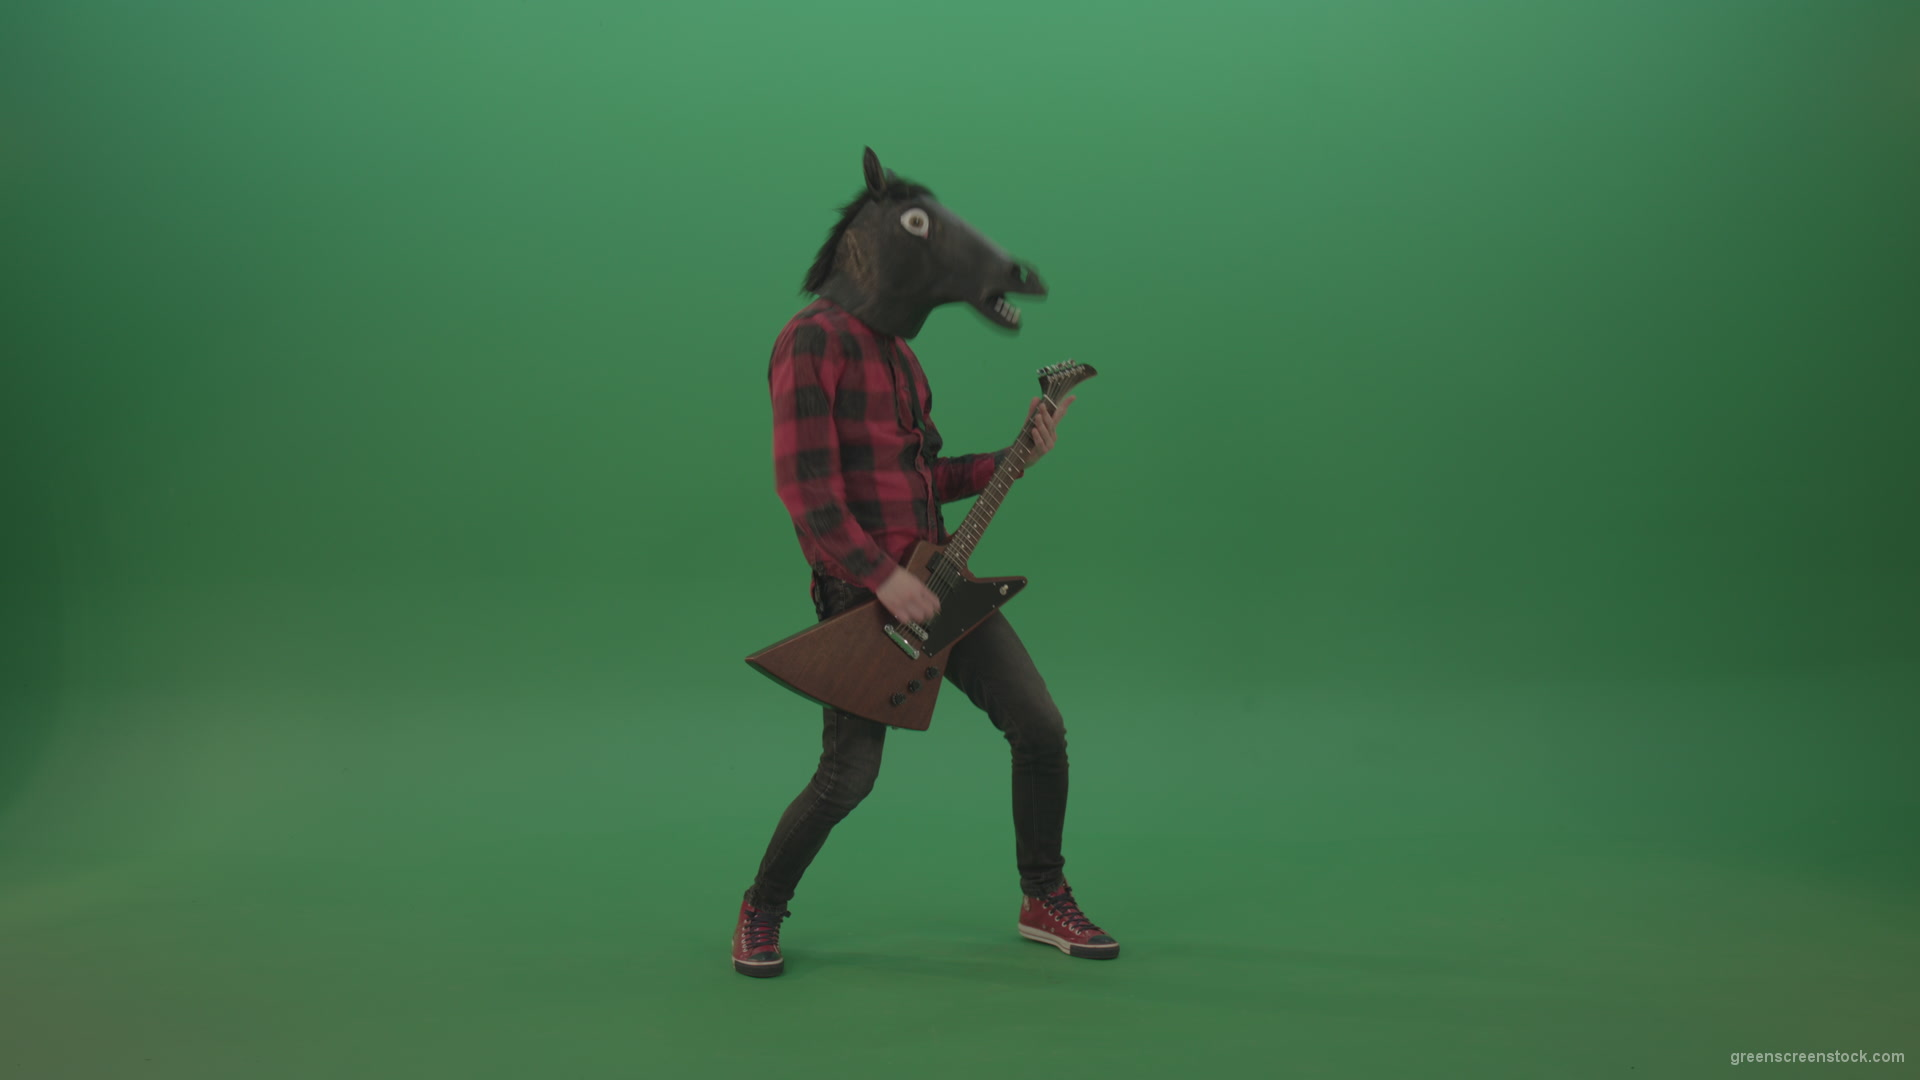 Guitarist-horse-man-with-horse-mask-head-play-guitar-on-green-screen_005 Green Screen Stock